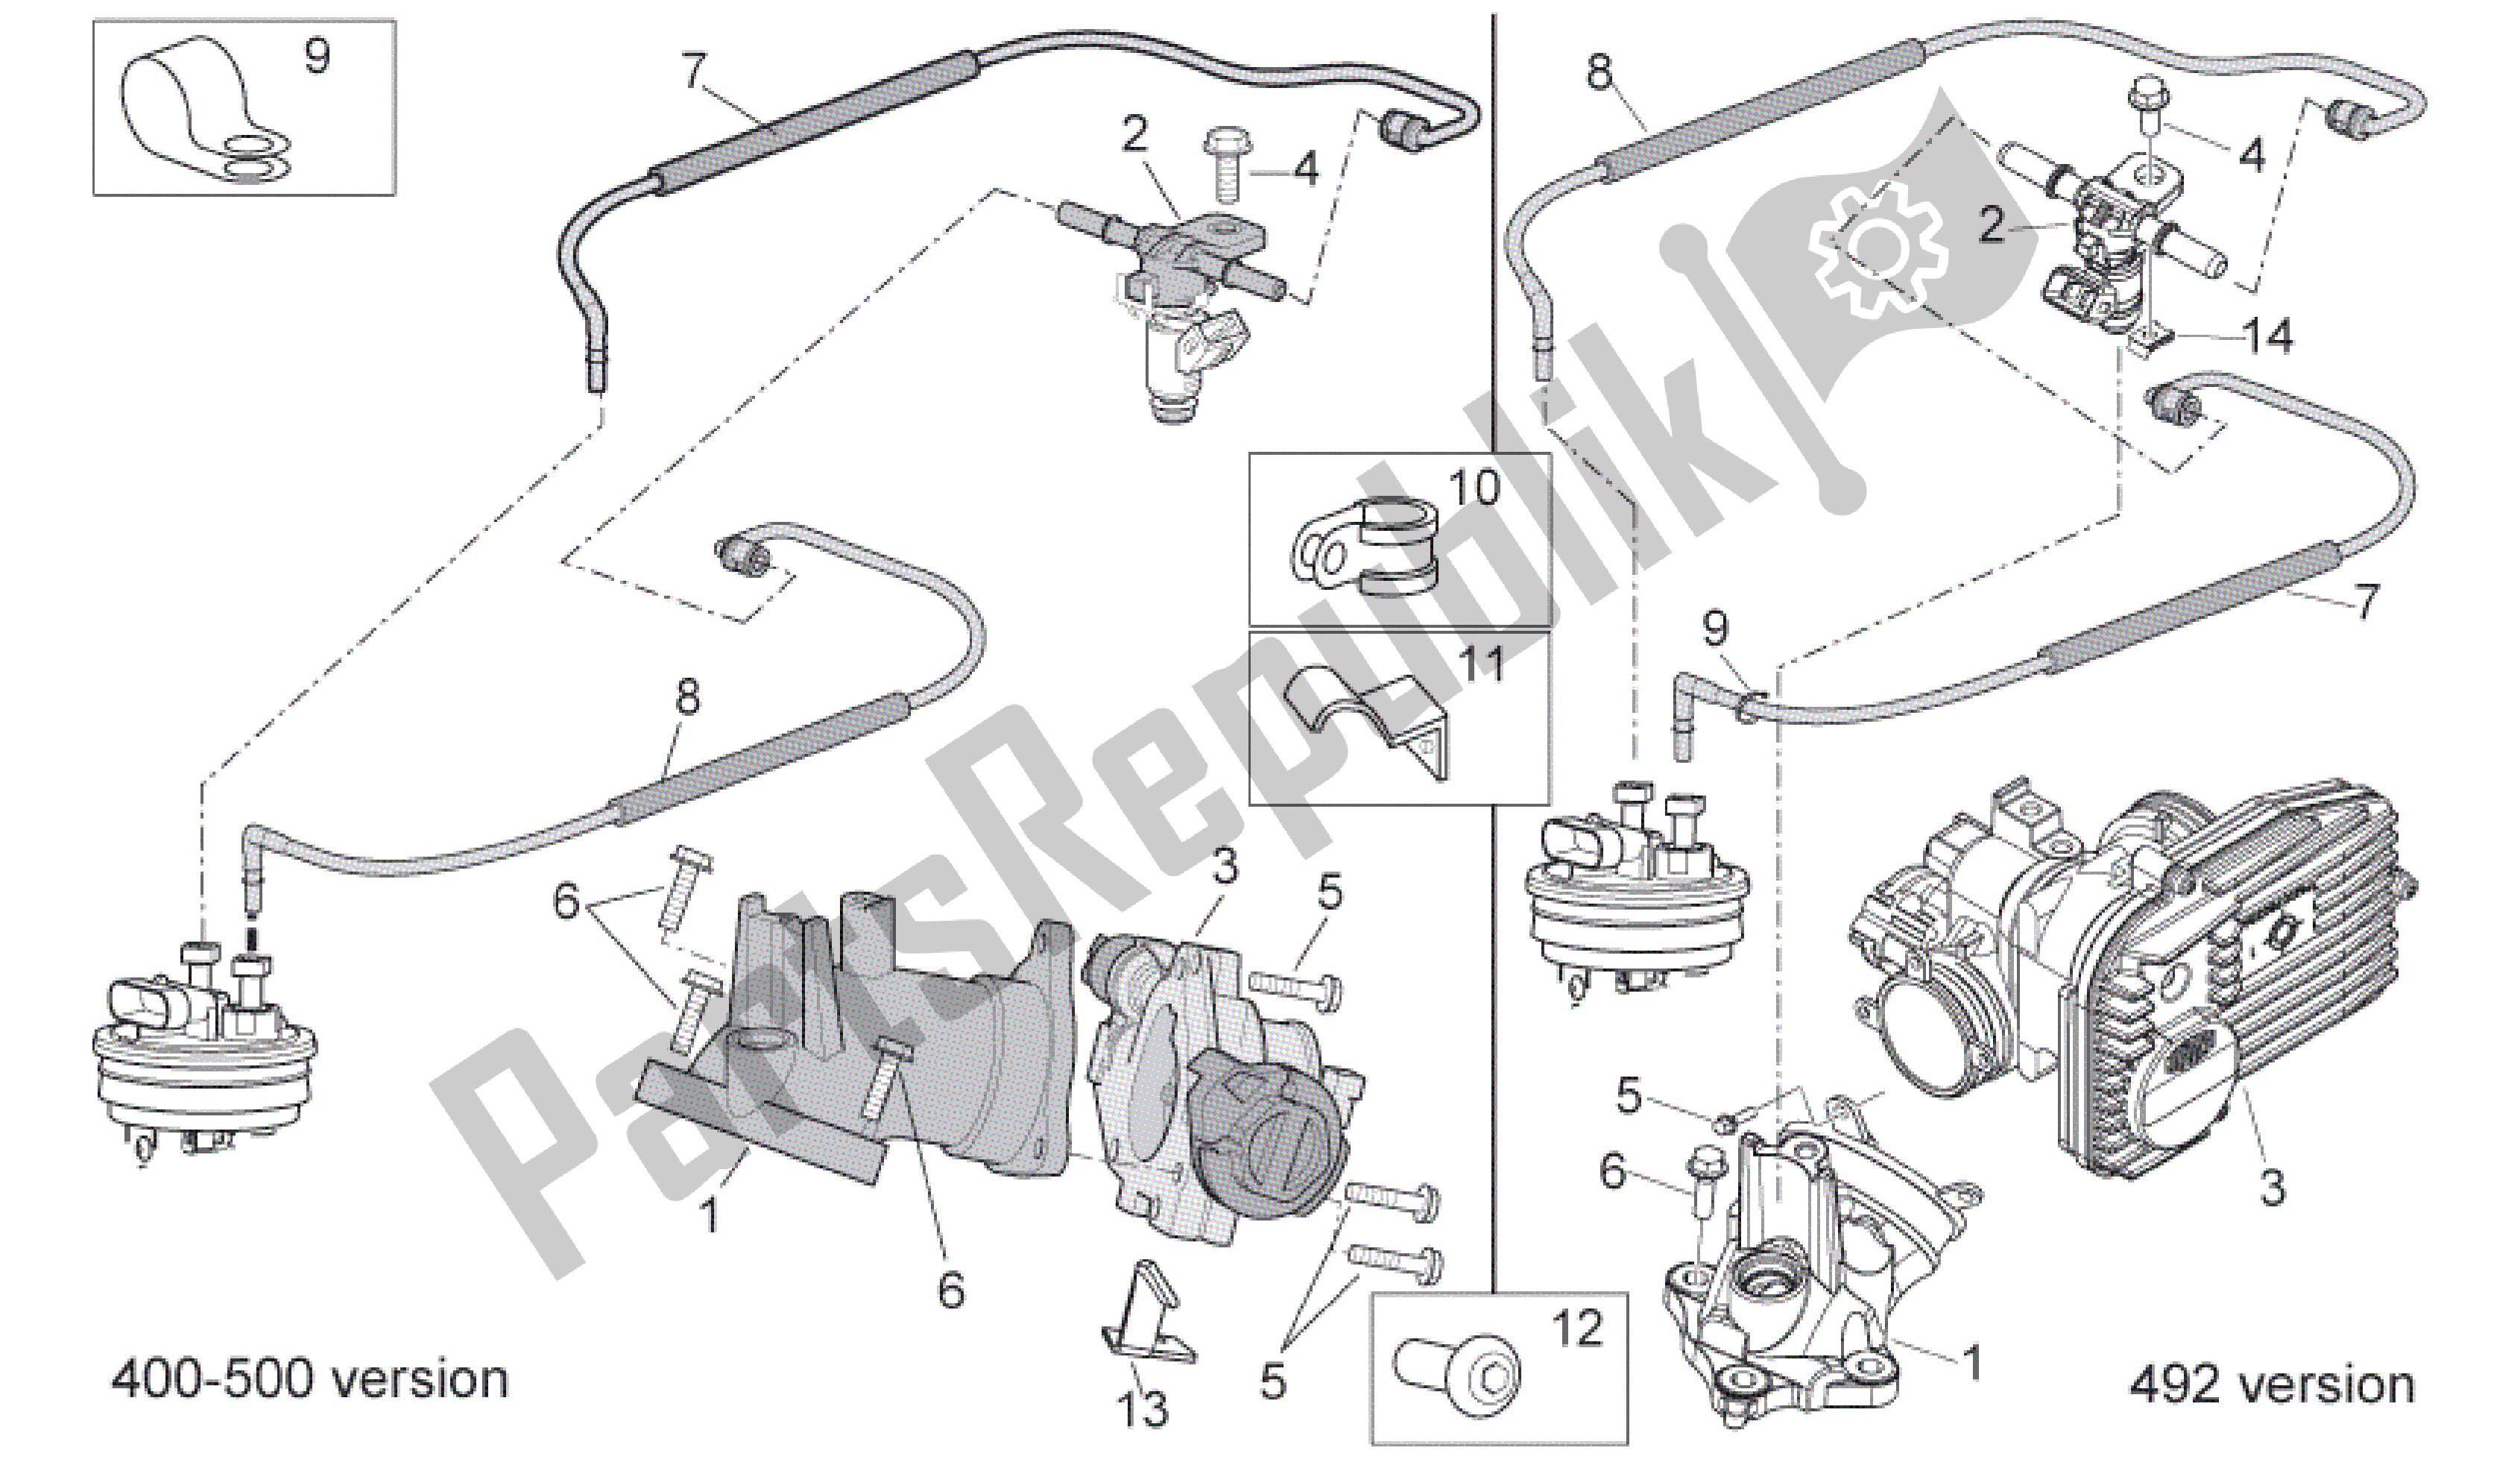 All parts for the Throttle Body of the Aprilia Scarabeo 400 2006 - 2008